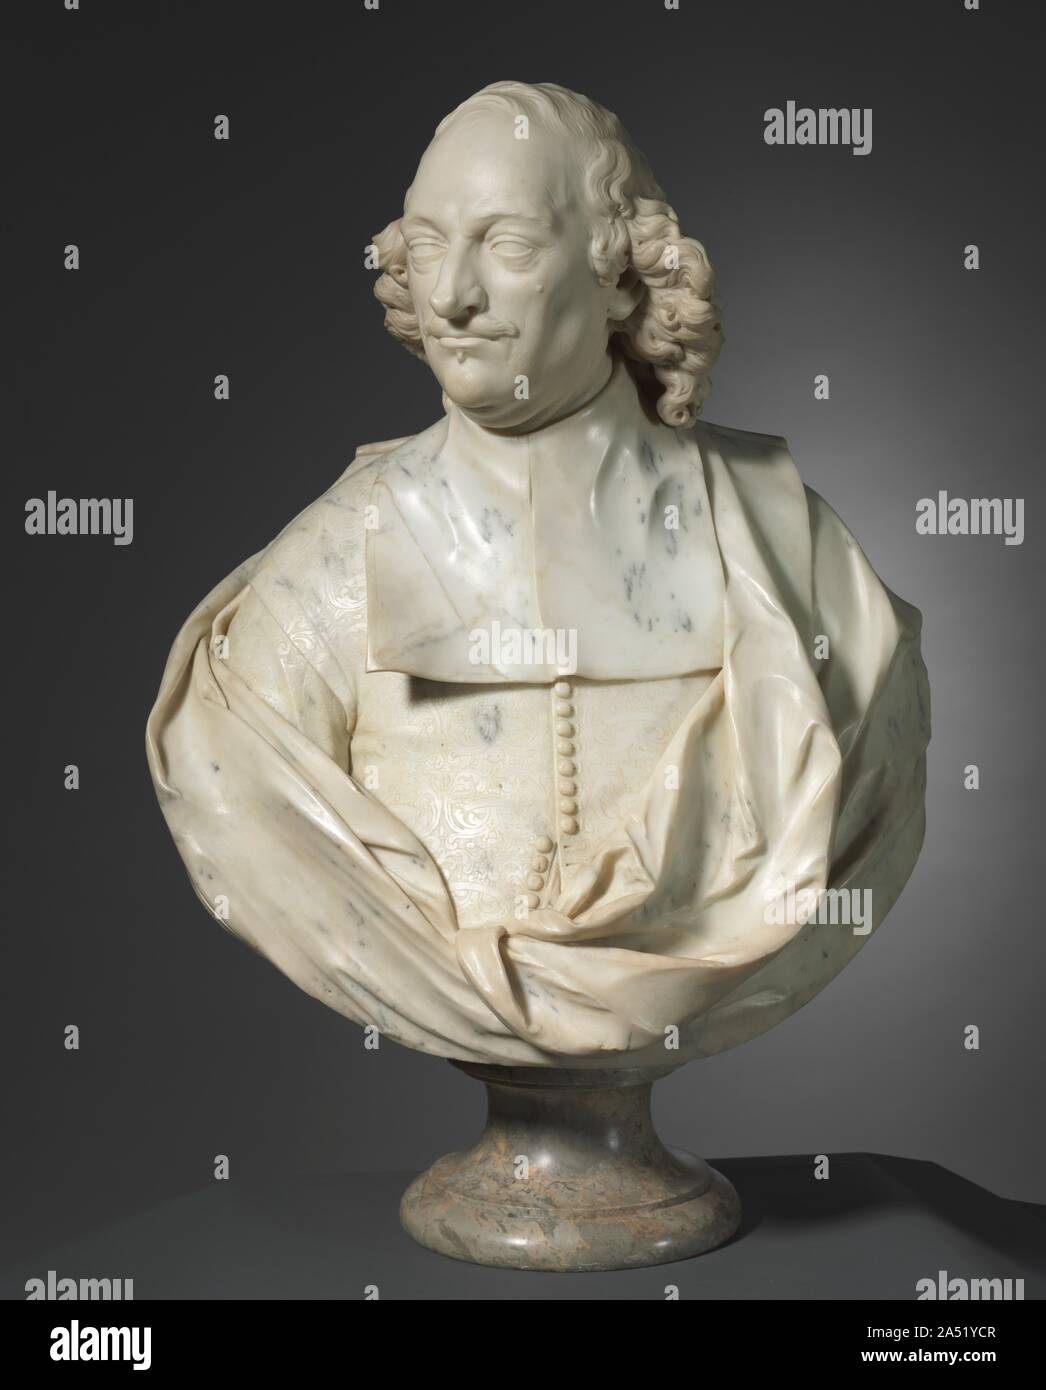 Portrait of Fabrizio Naro, c. 1680. This figure&#x2019;s individualized facial expression, dynamic turn of the head and animated drapery are all characteristic of 17th-century Roman portrait sculpture. Guidi, a pupil of Alessandro Algardi, juxtaposed broad swaths of drapery and deeply drilled and carved hair with delicate surface detail, visible here in the patterning of the jacket and the faint suggestion of a beard. Based on a comparison with a later portrait on the family tomb in the church of Santa Maria sopra Minerva, Rome, the sitter has been identified as Fabrizio Naro (d. 1697), marqui Stock Photo